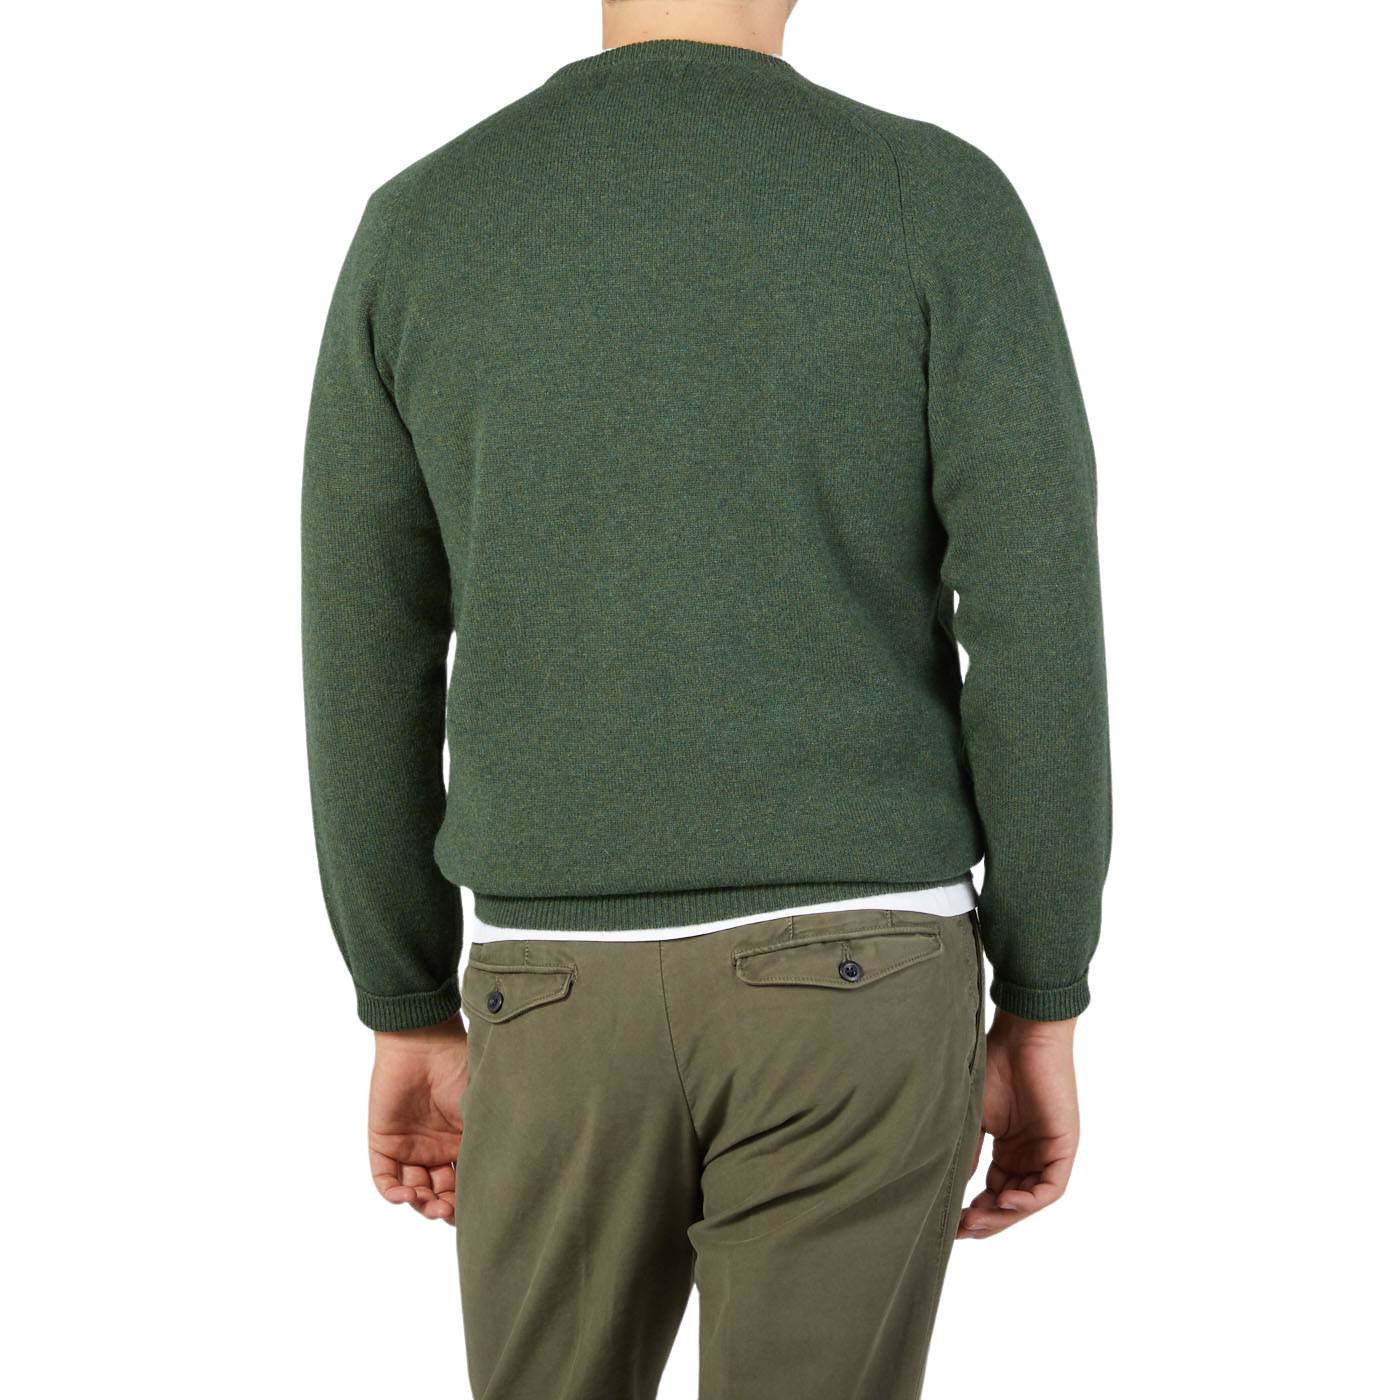 The contemporary version of a man wearing an Alan Paine Rosemary Green Lambswool crew neck sweater and khaki pants.